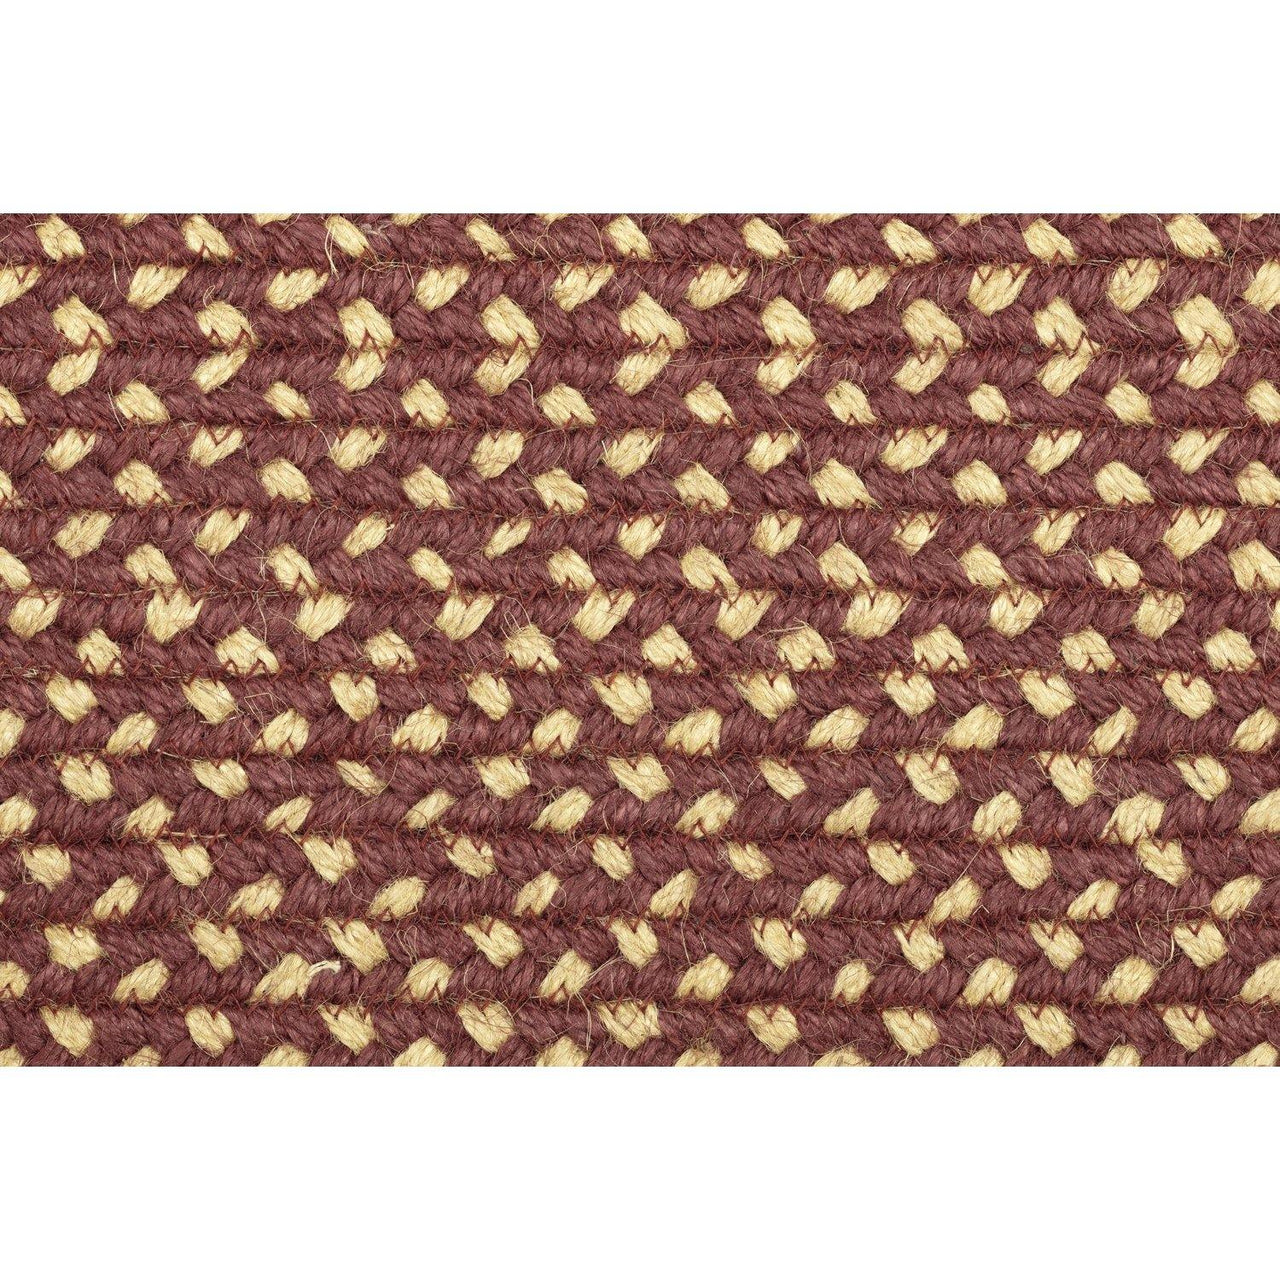 Burgundy Red Primitive Jute Braided Rug Rect 5'x8' with Rug Pad VHC Brands - The Fox Decor